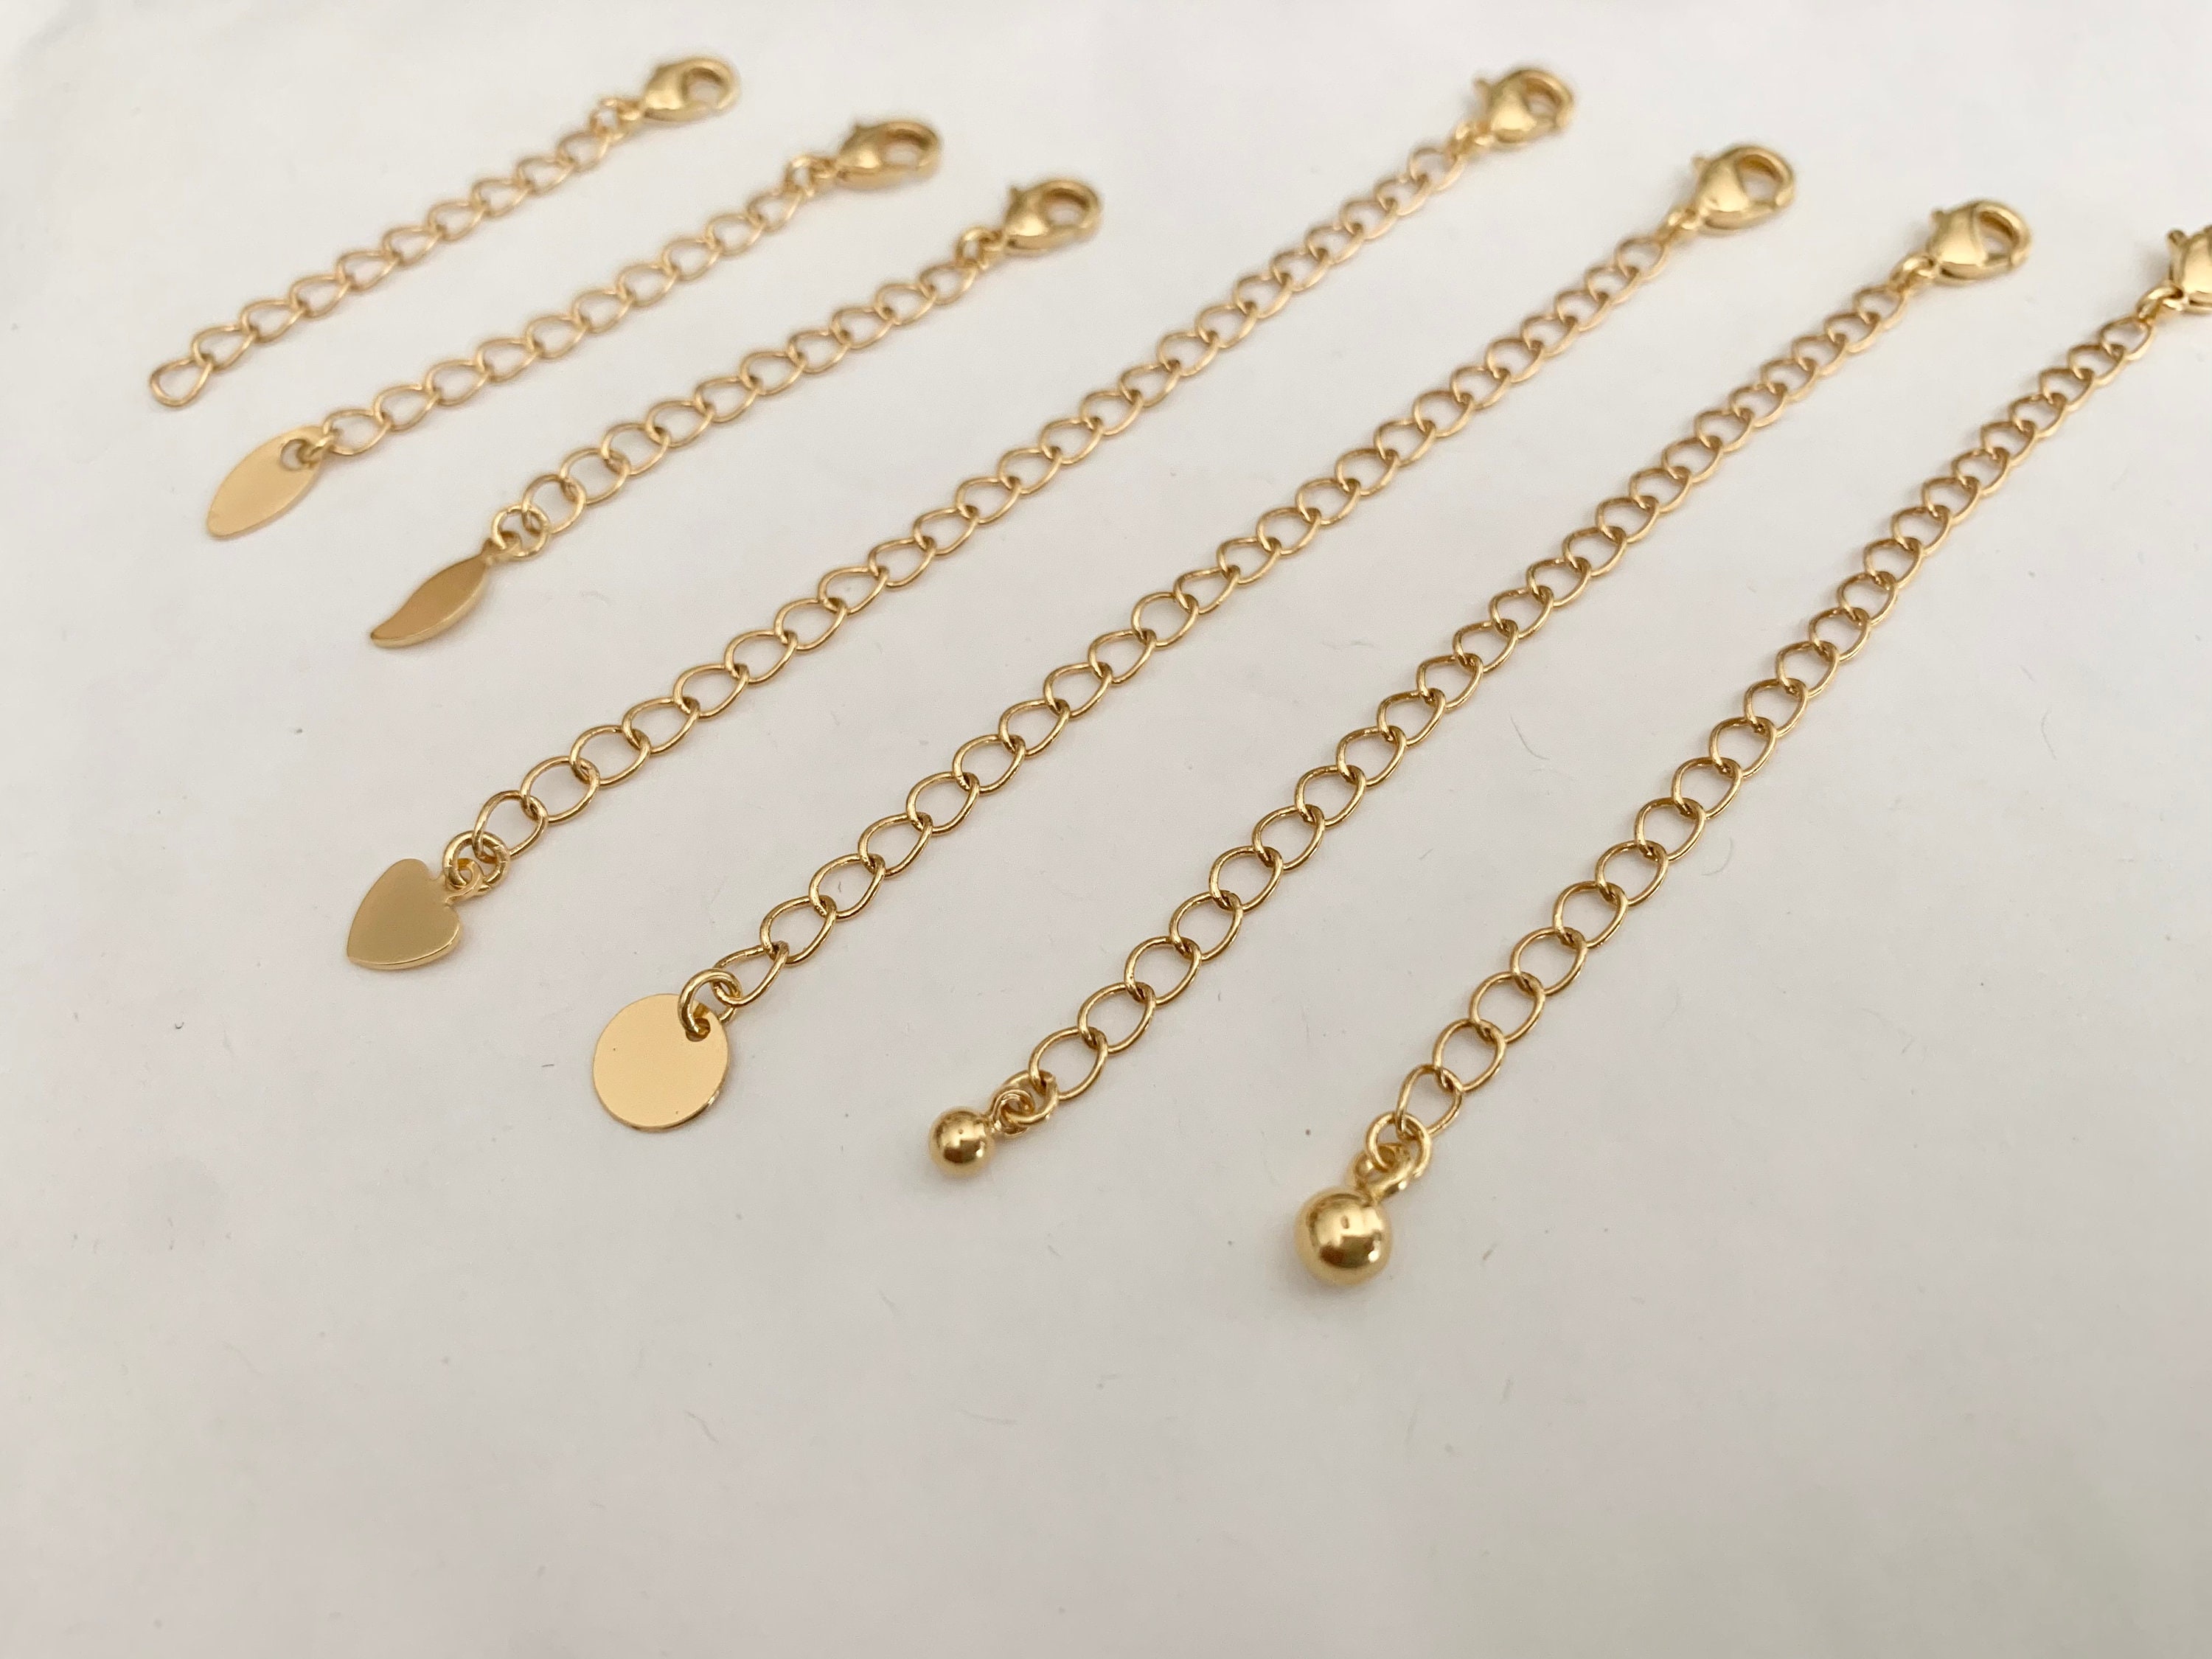 Gold Chain Extension for Necklace and Bracelet, Adjustable